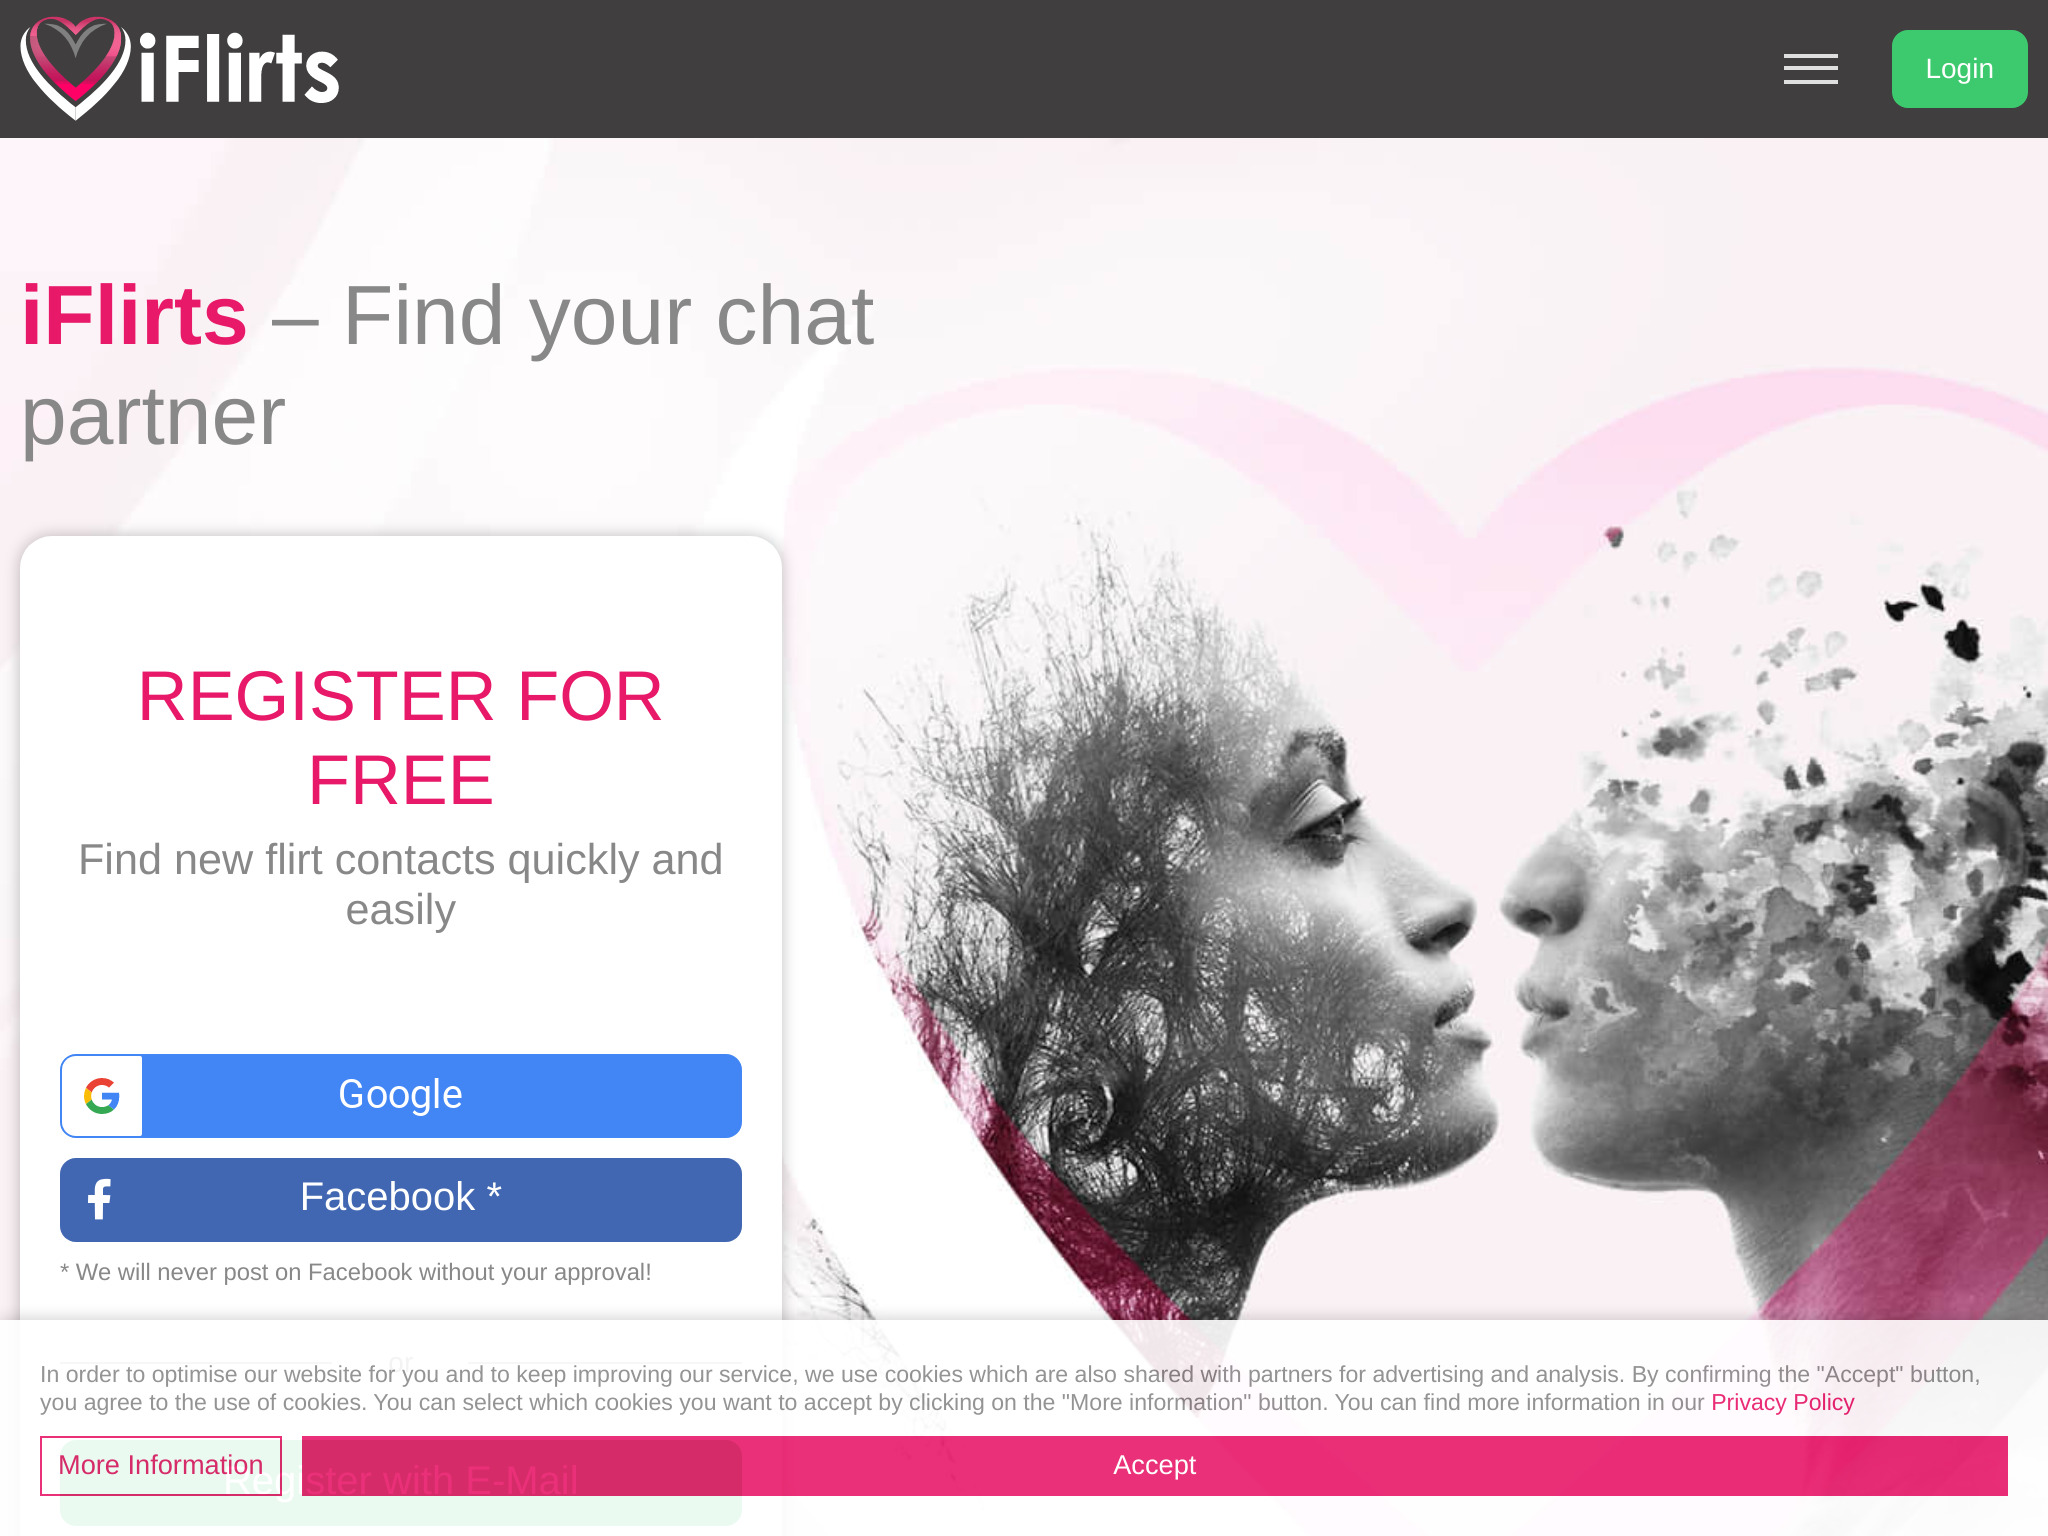 iflirts Review: Is It Safe and Reliable?